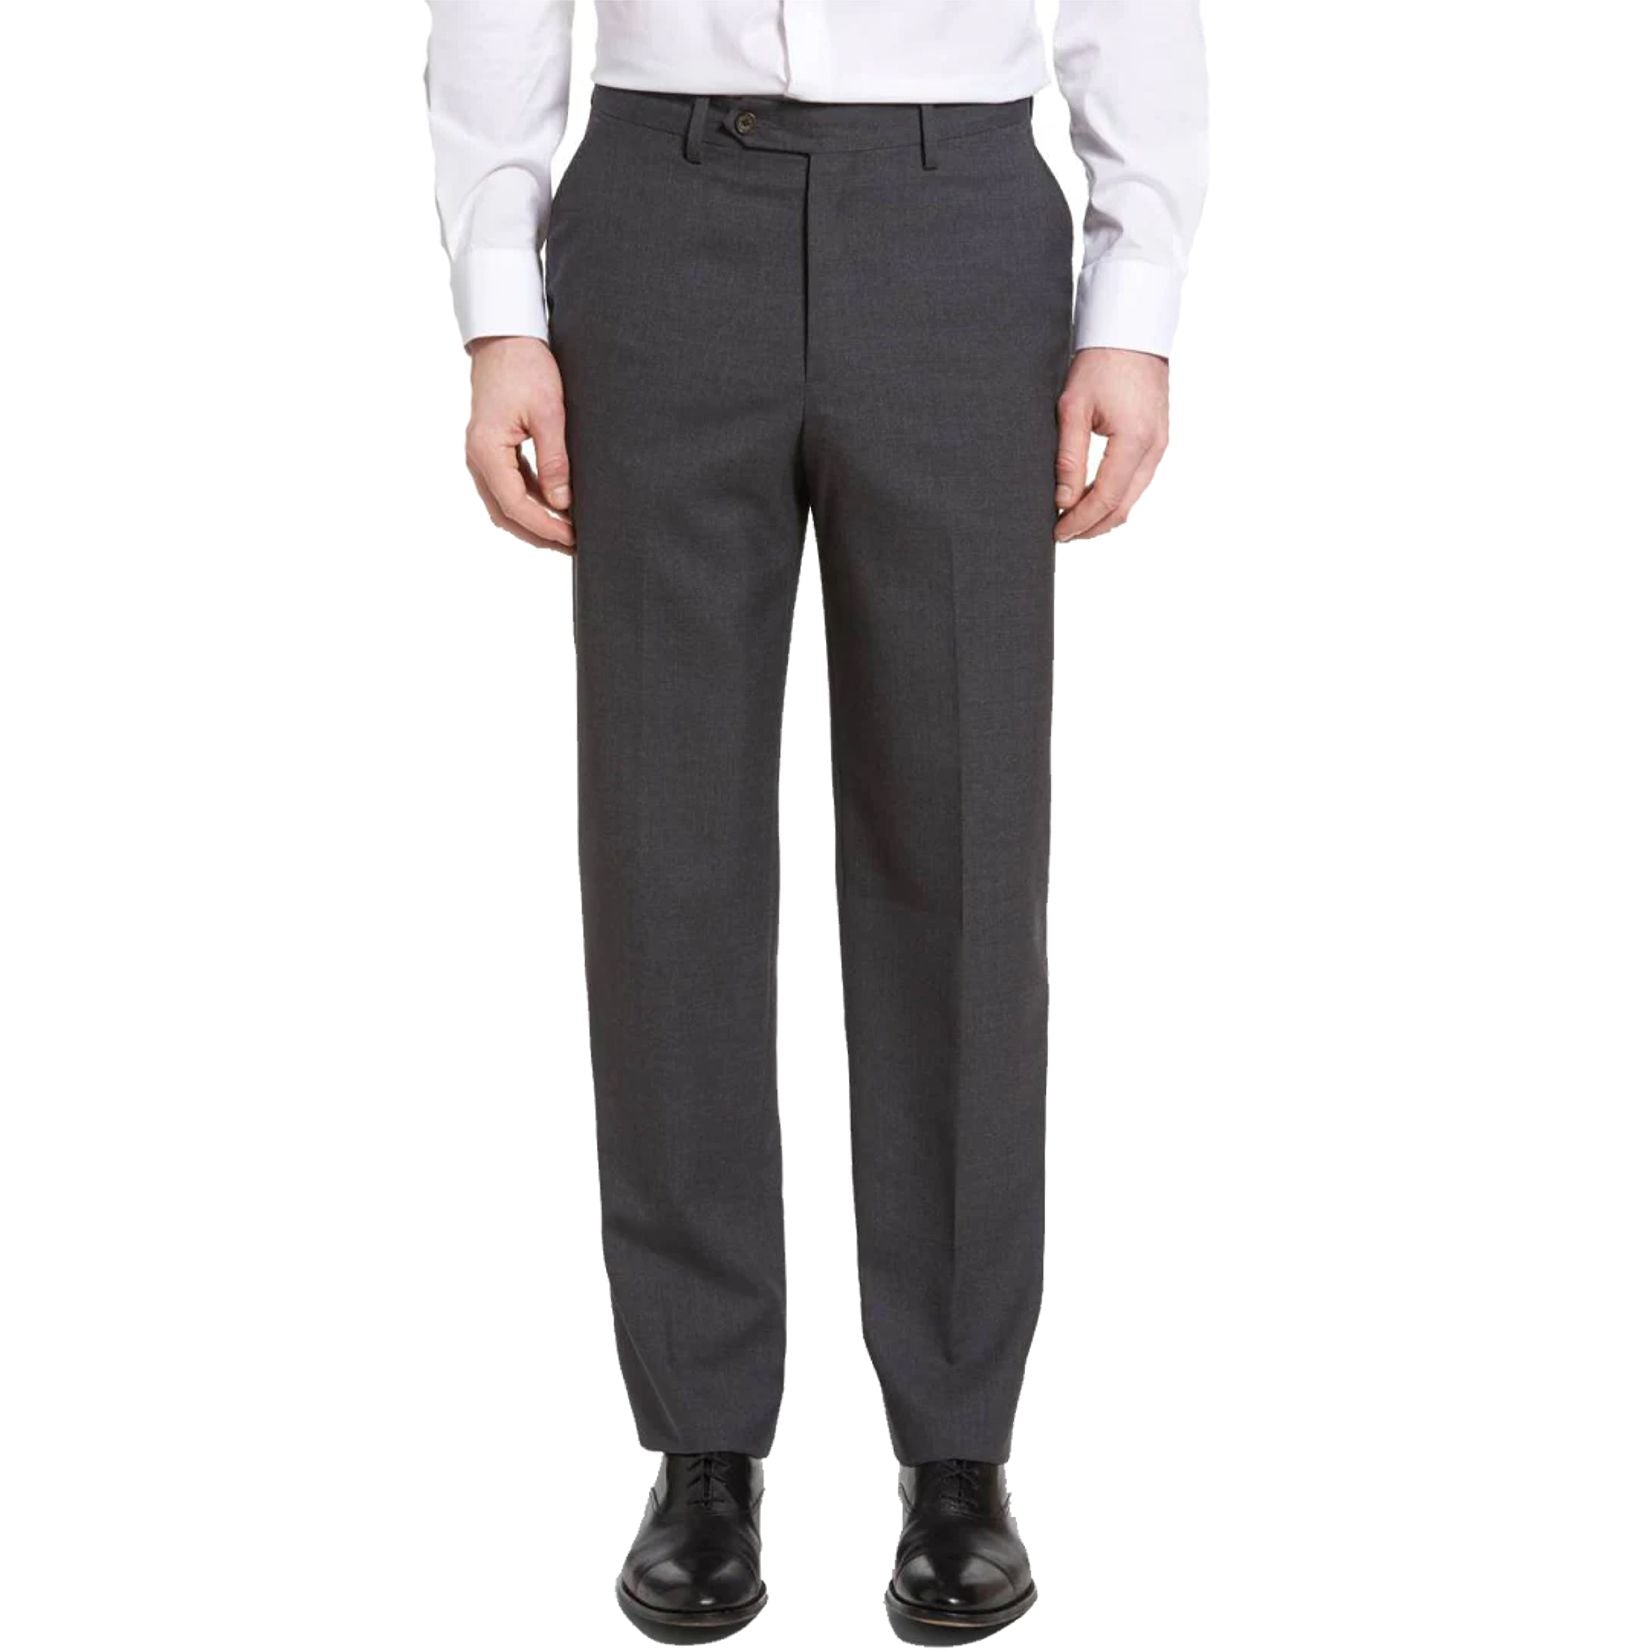 Worsted Wool Tropical Trouser in Medium Grey (Self Sizer Plain Front) by Berle